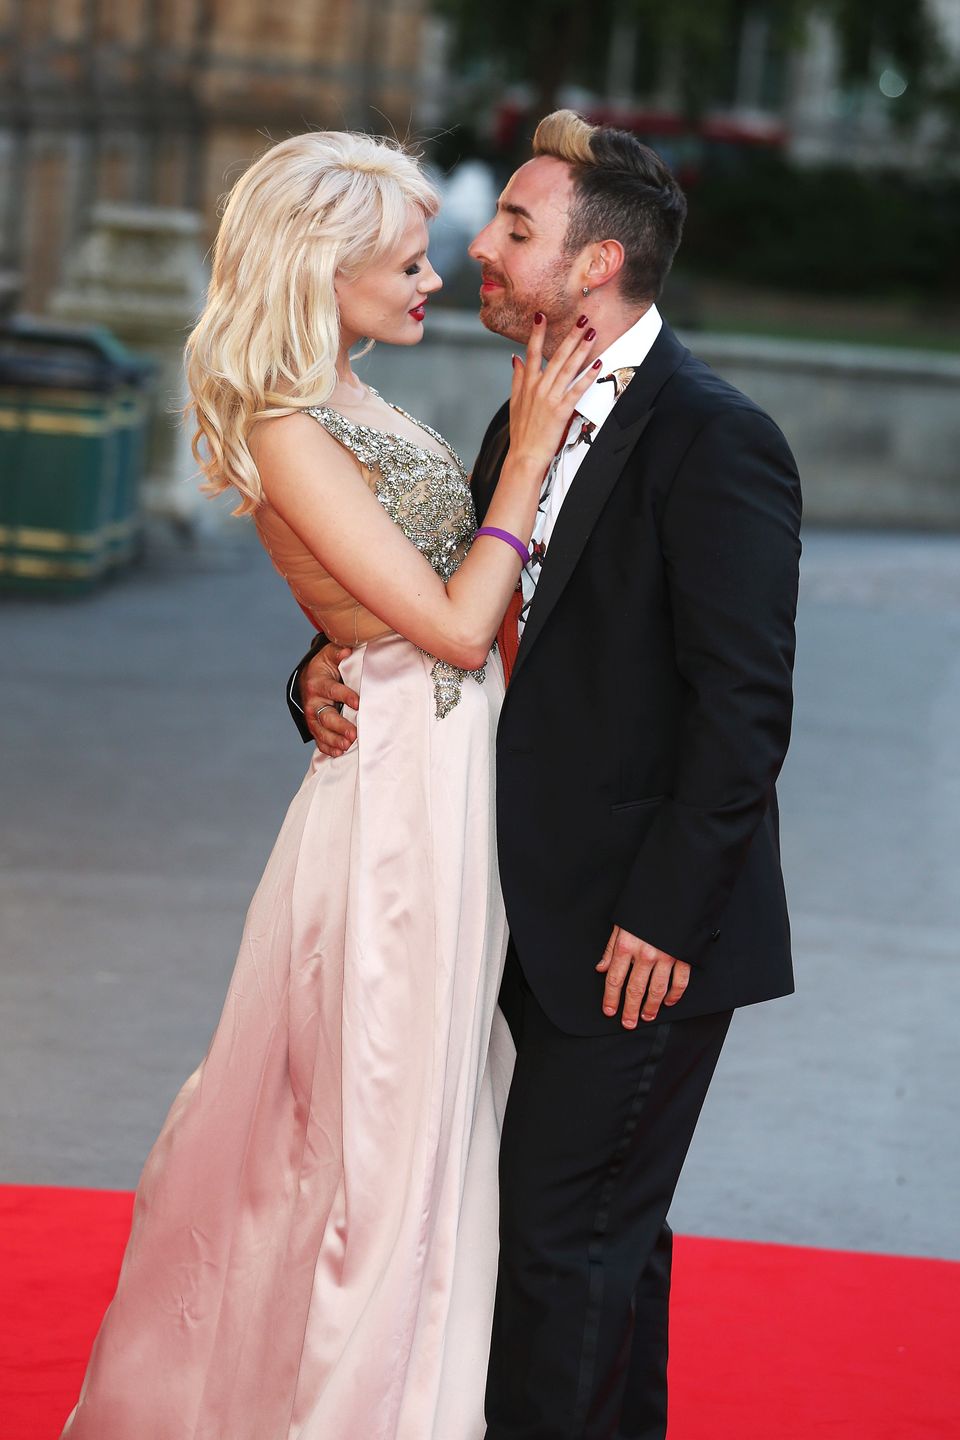 Chloe Jasmine and Stevi Ritchie ('The X Factor')